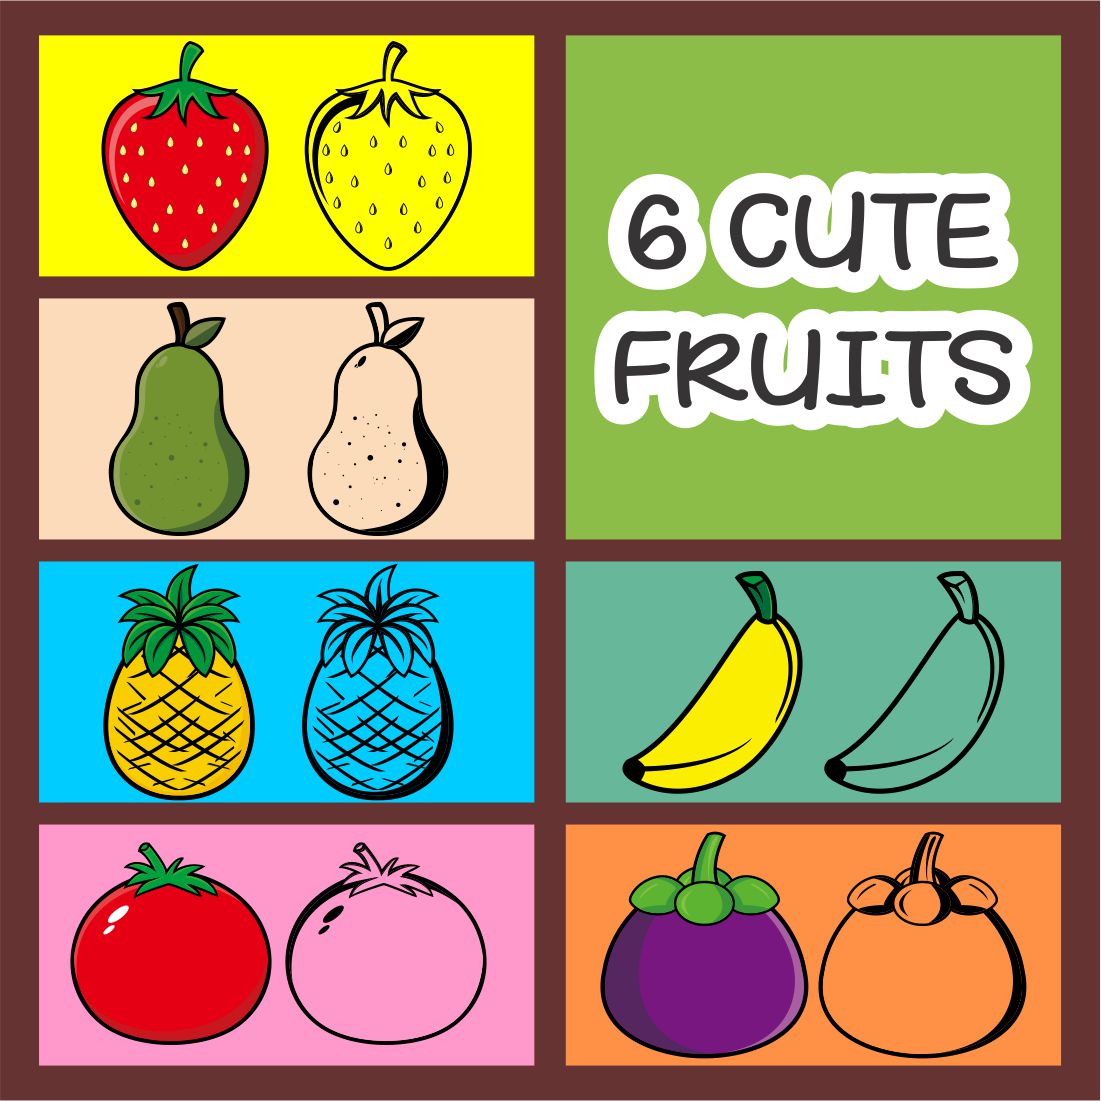 6 Cute Fruits - Only $13 preview image.